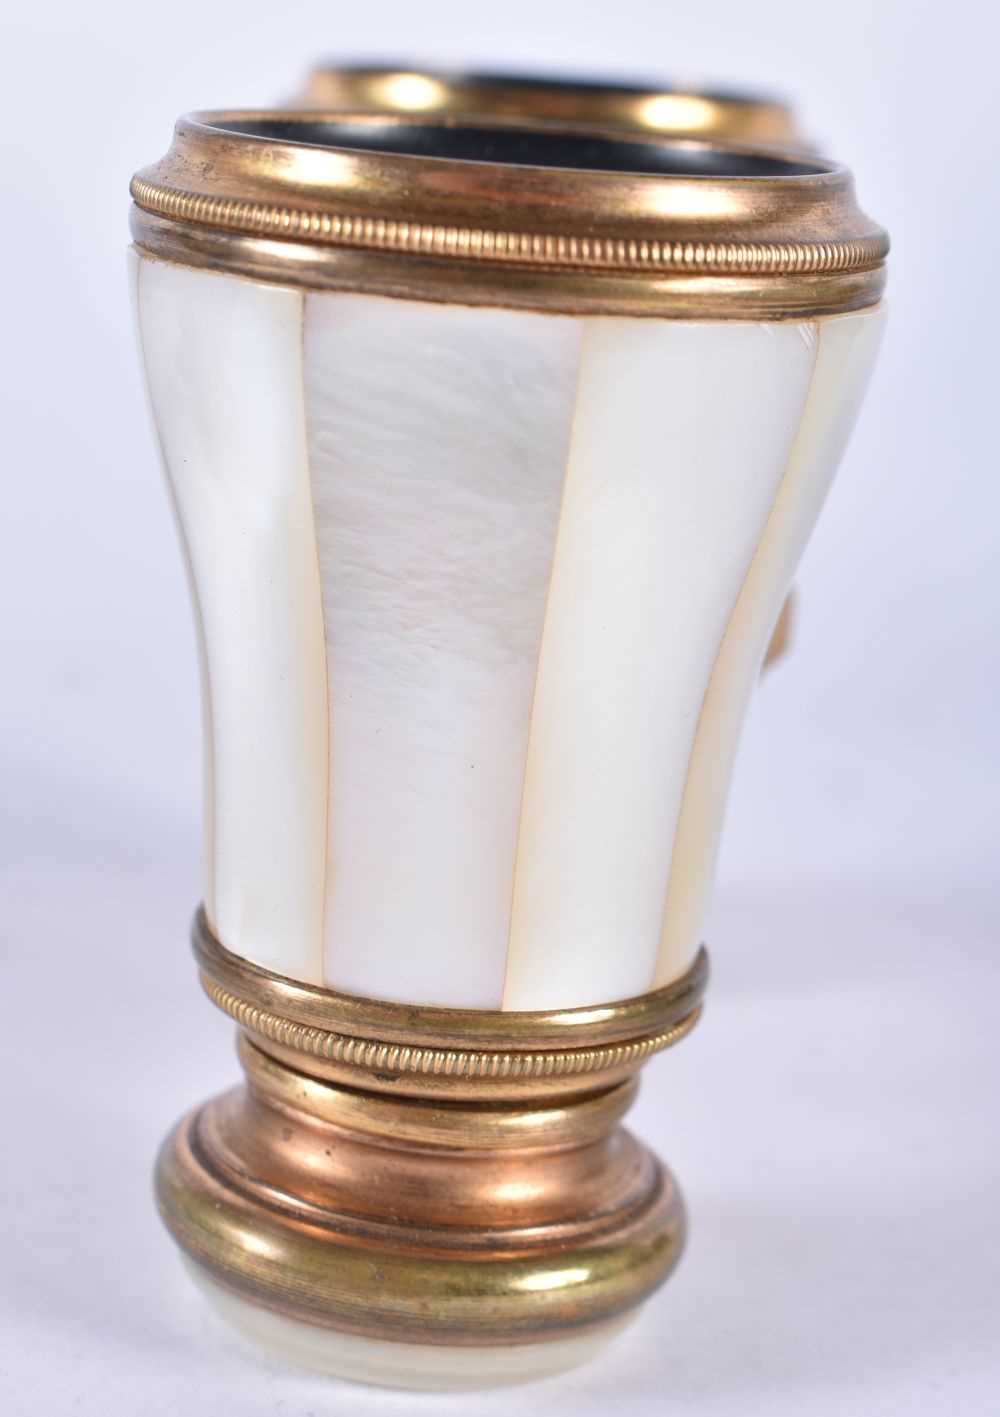 A PAIR OF MOTHER OF PEARL OPERA GLASSES. 9 cm x 8 cm. - Image 3 of 5